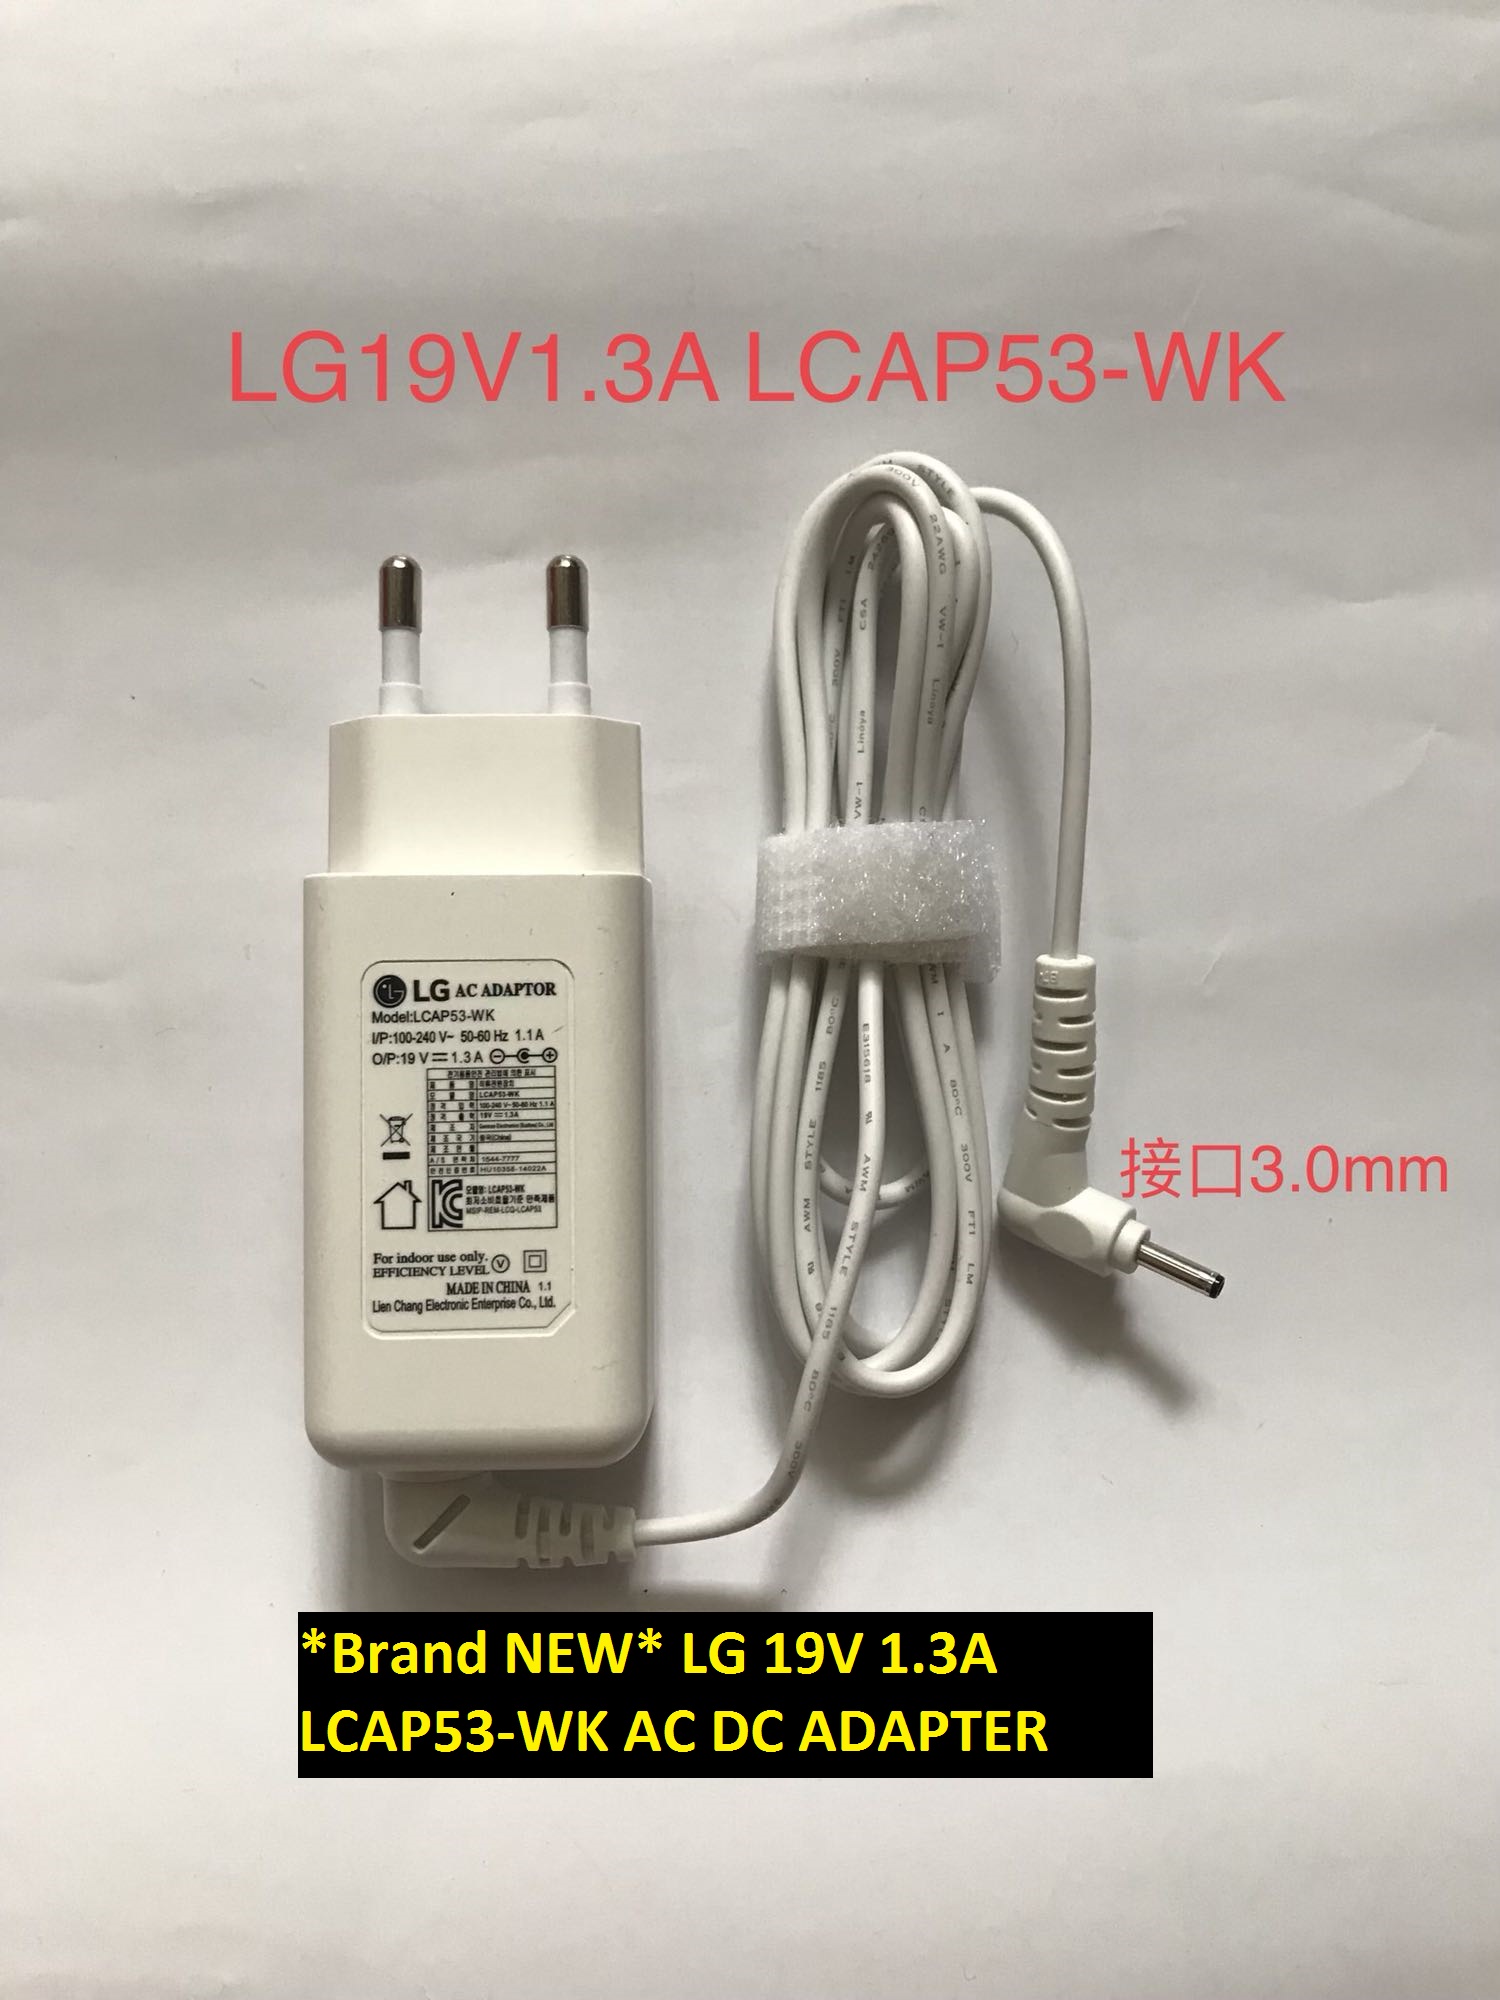 *Brand NEW* LCAP53-WK LG 19V 1.3A AC DC ADAPTER POWER SUPPLY